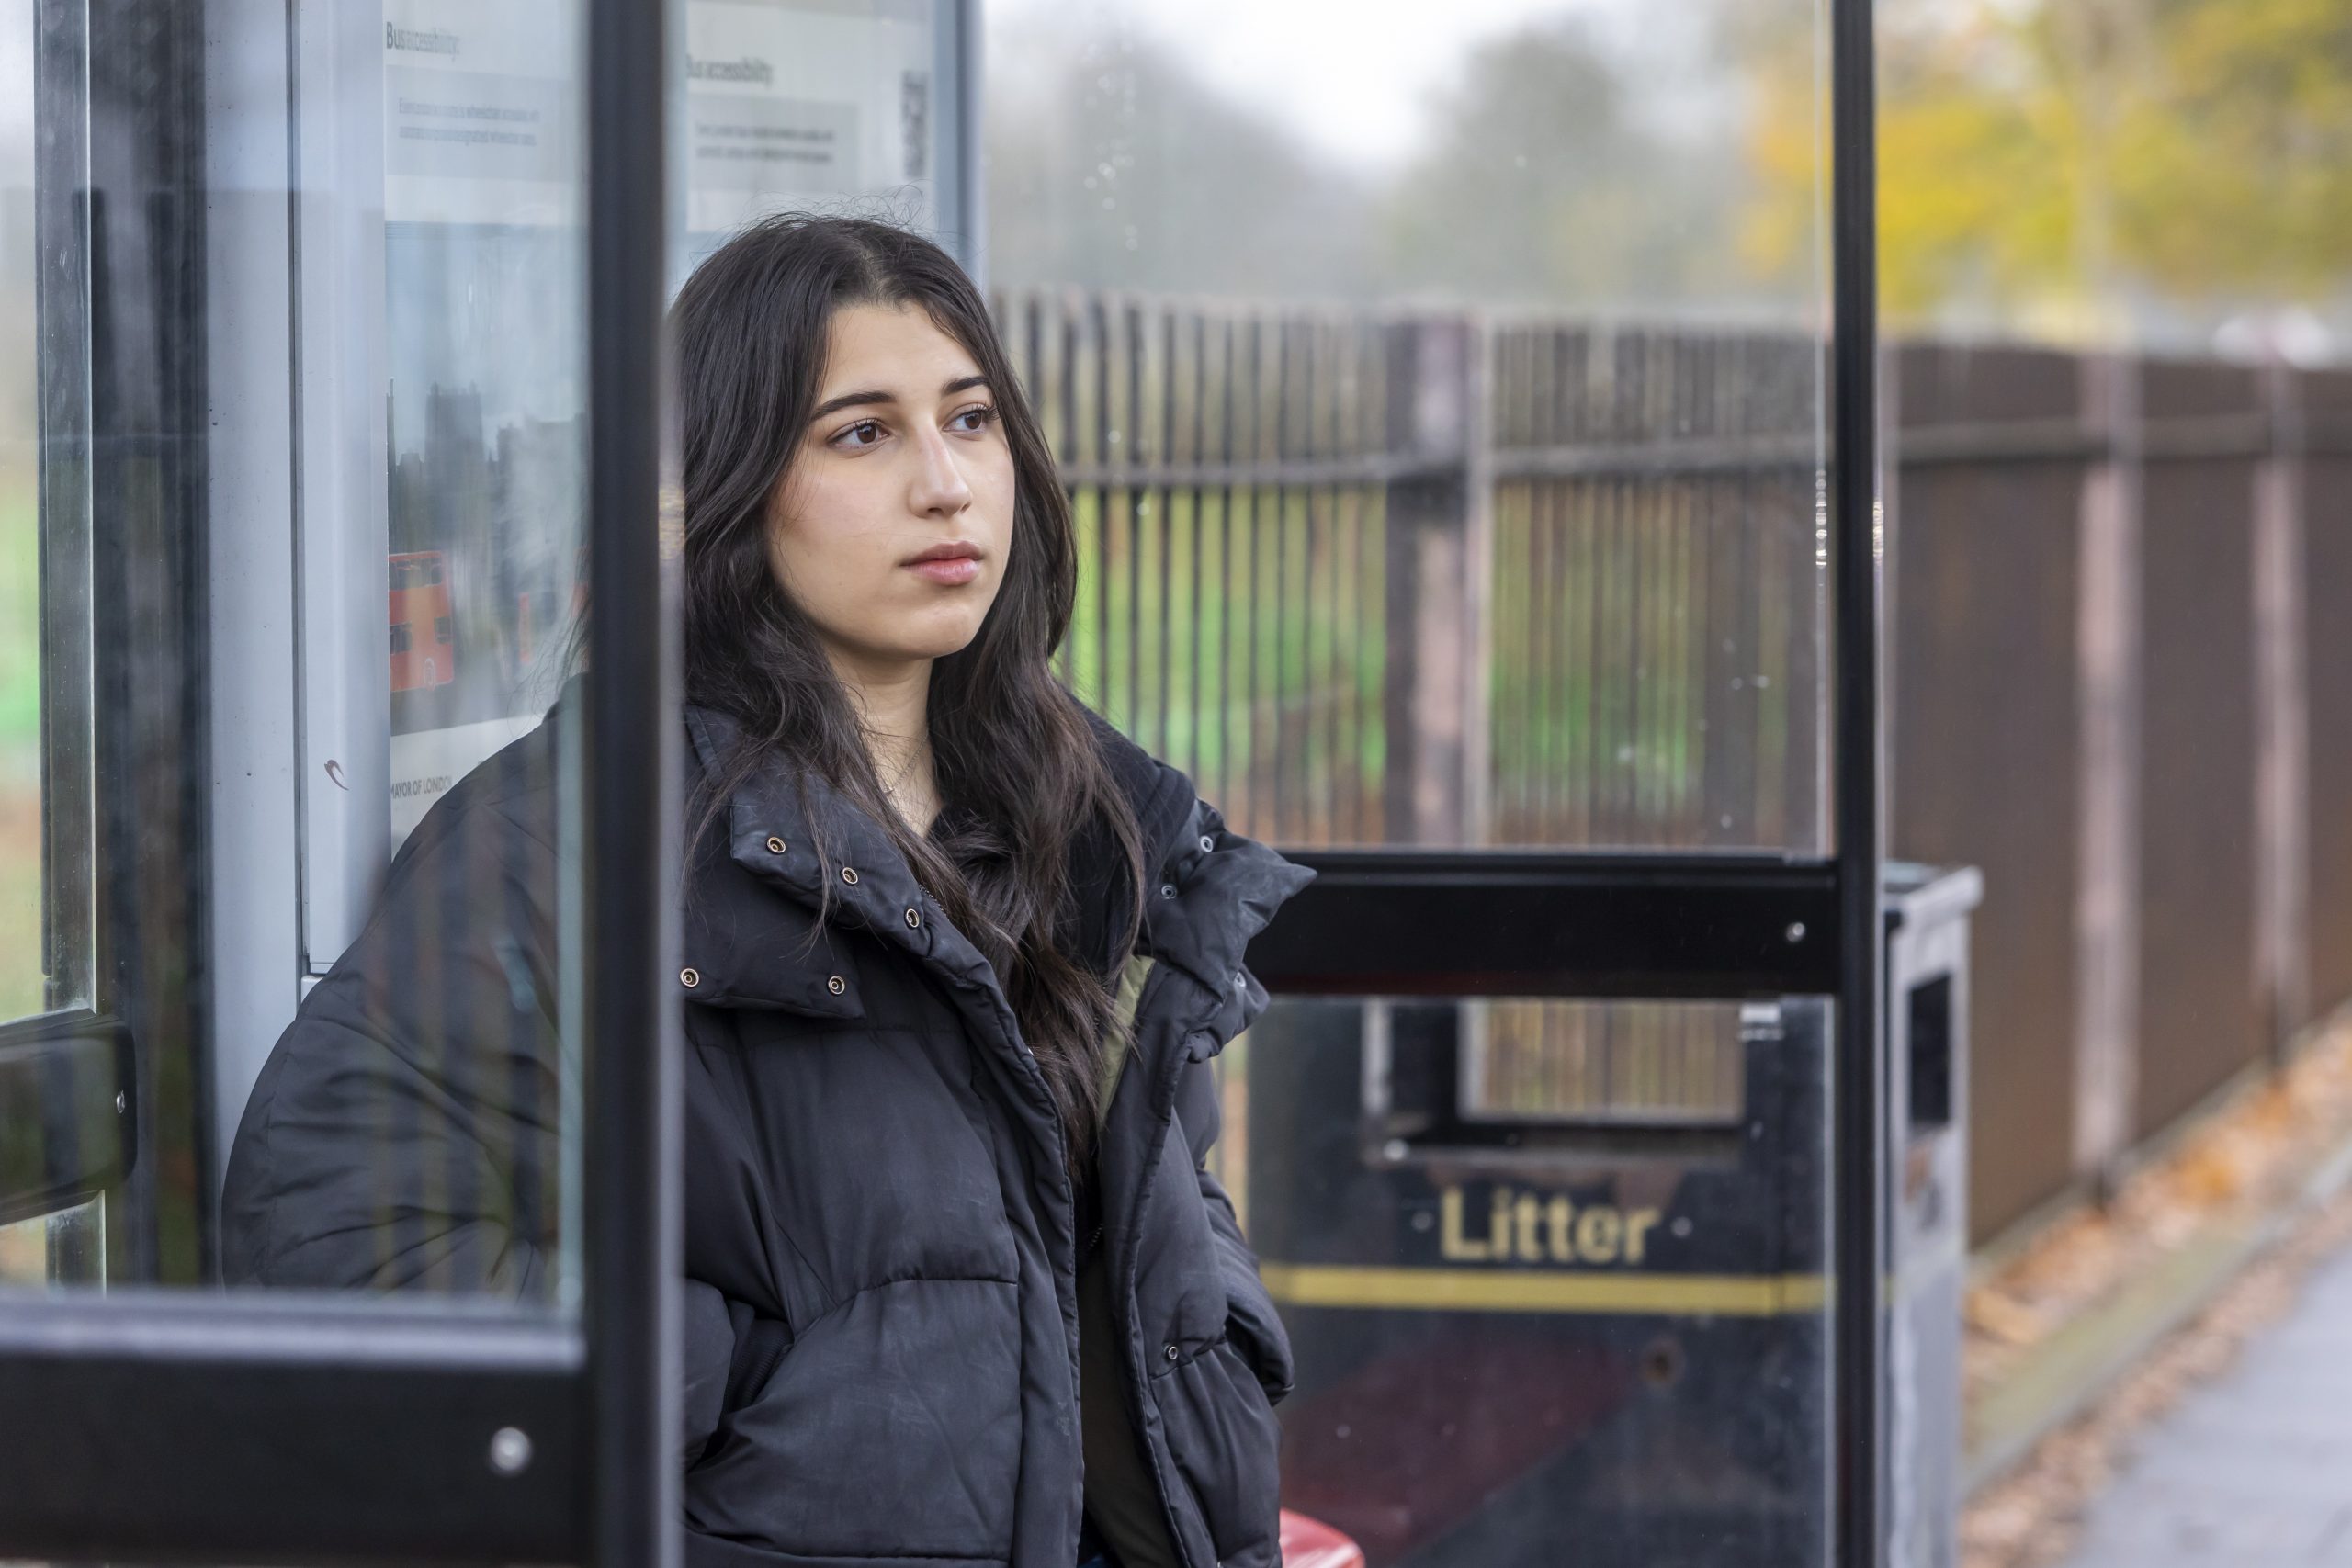 A young person is sitting at a bus stop.